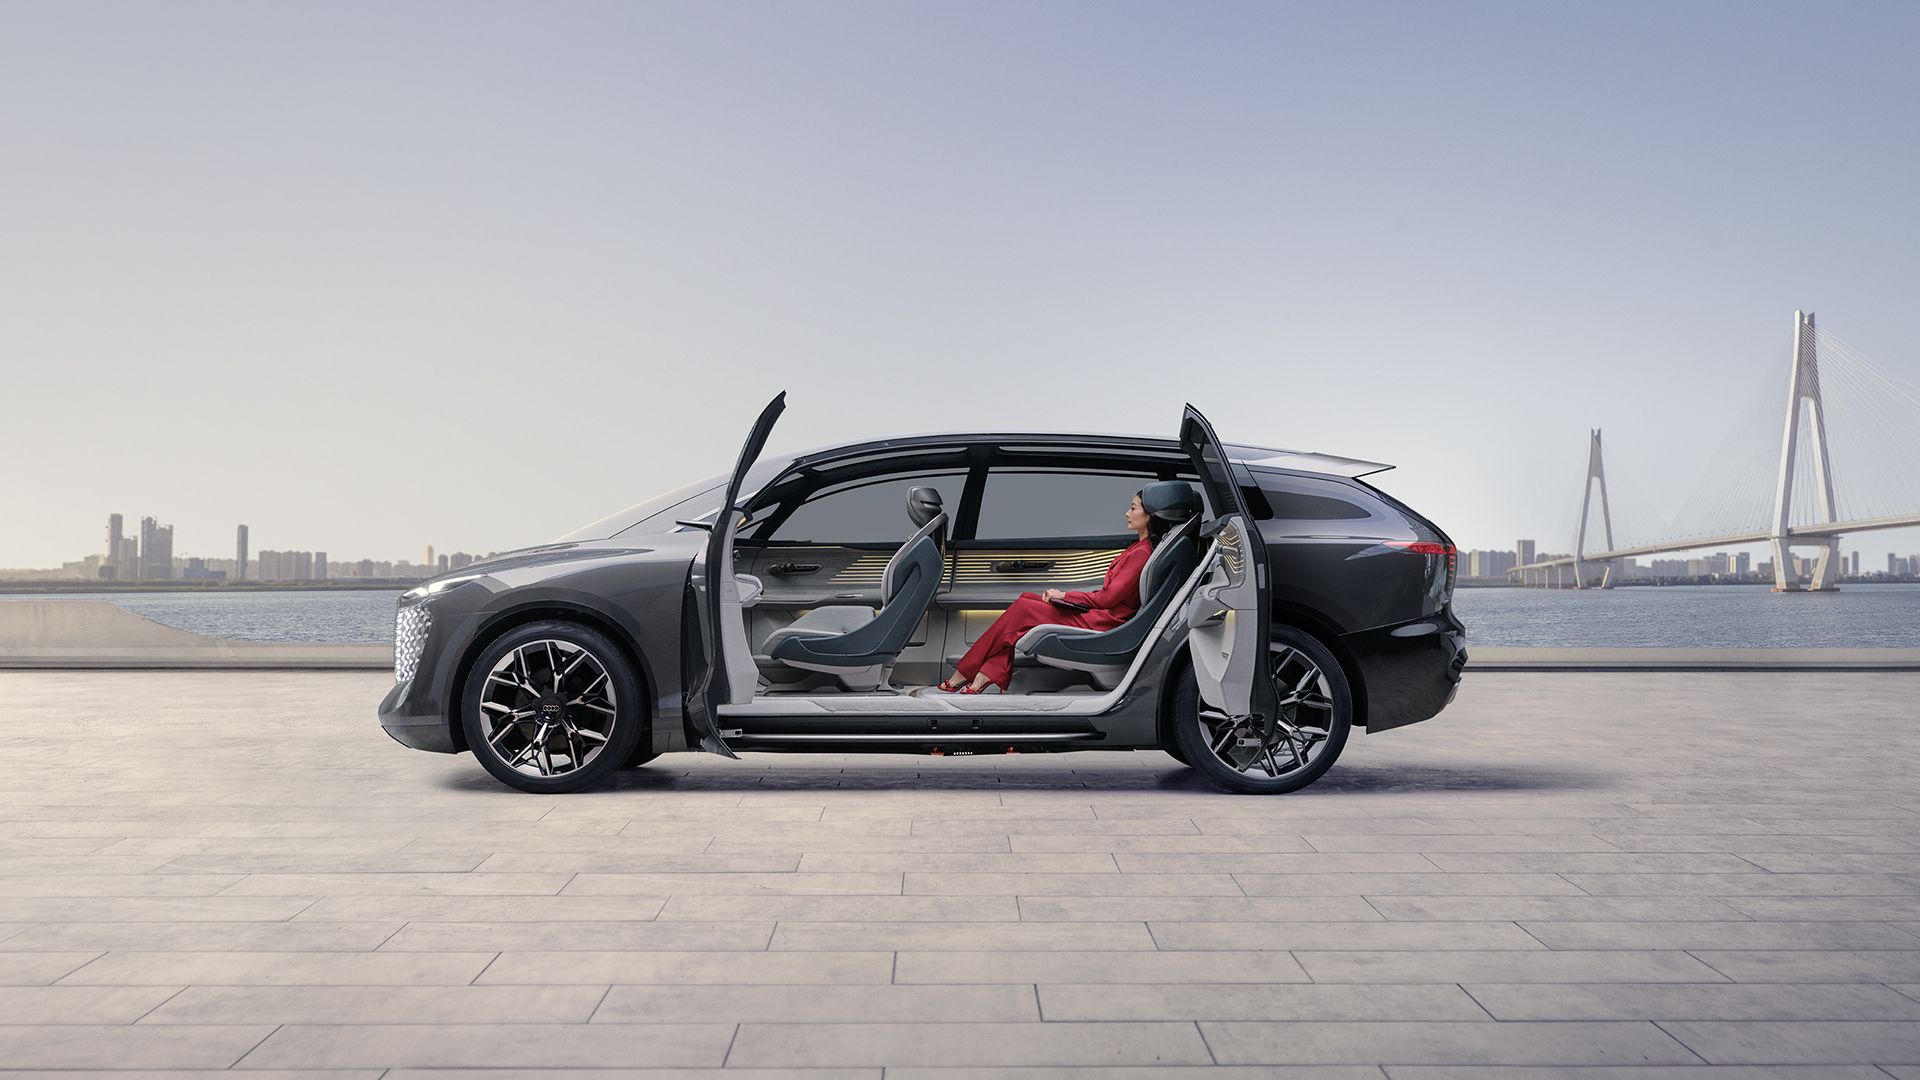 Side view of the Audi urbansphere concept with open swing doors and view of the interior.